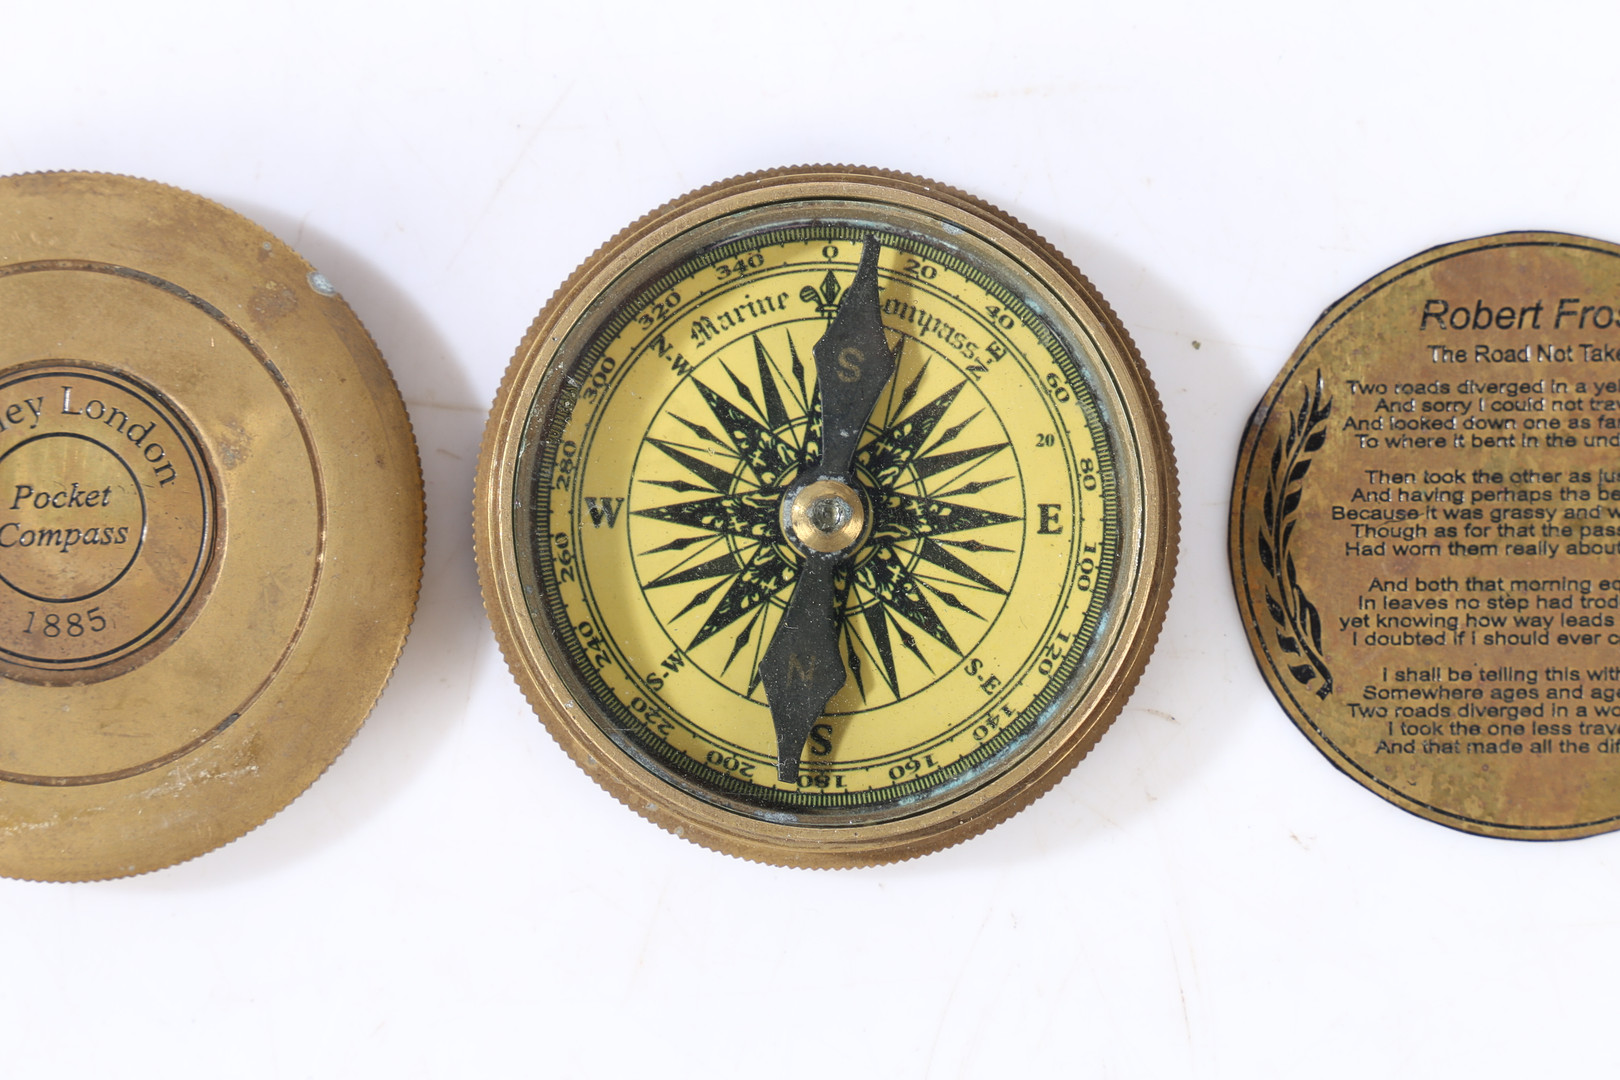 A STANLEY LONDON POCKET COMPASS 1885. - Image 3 of 6